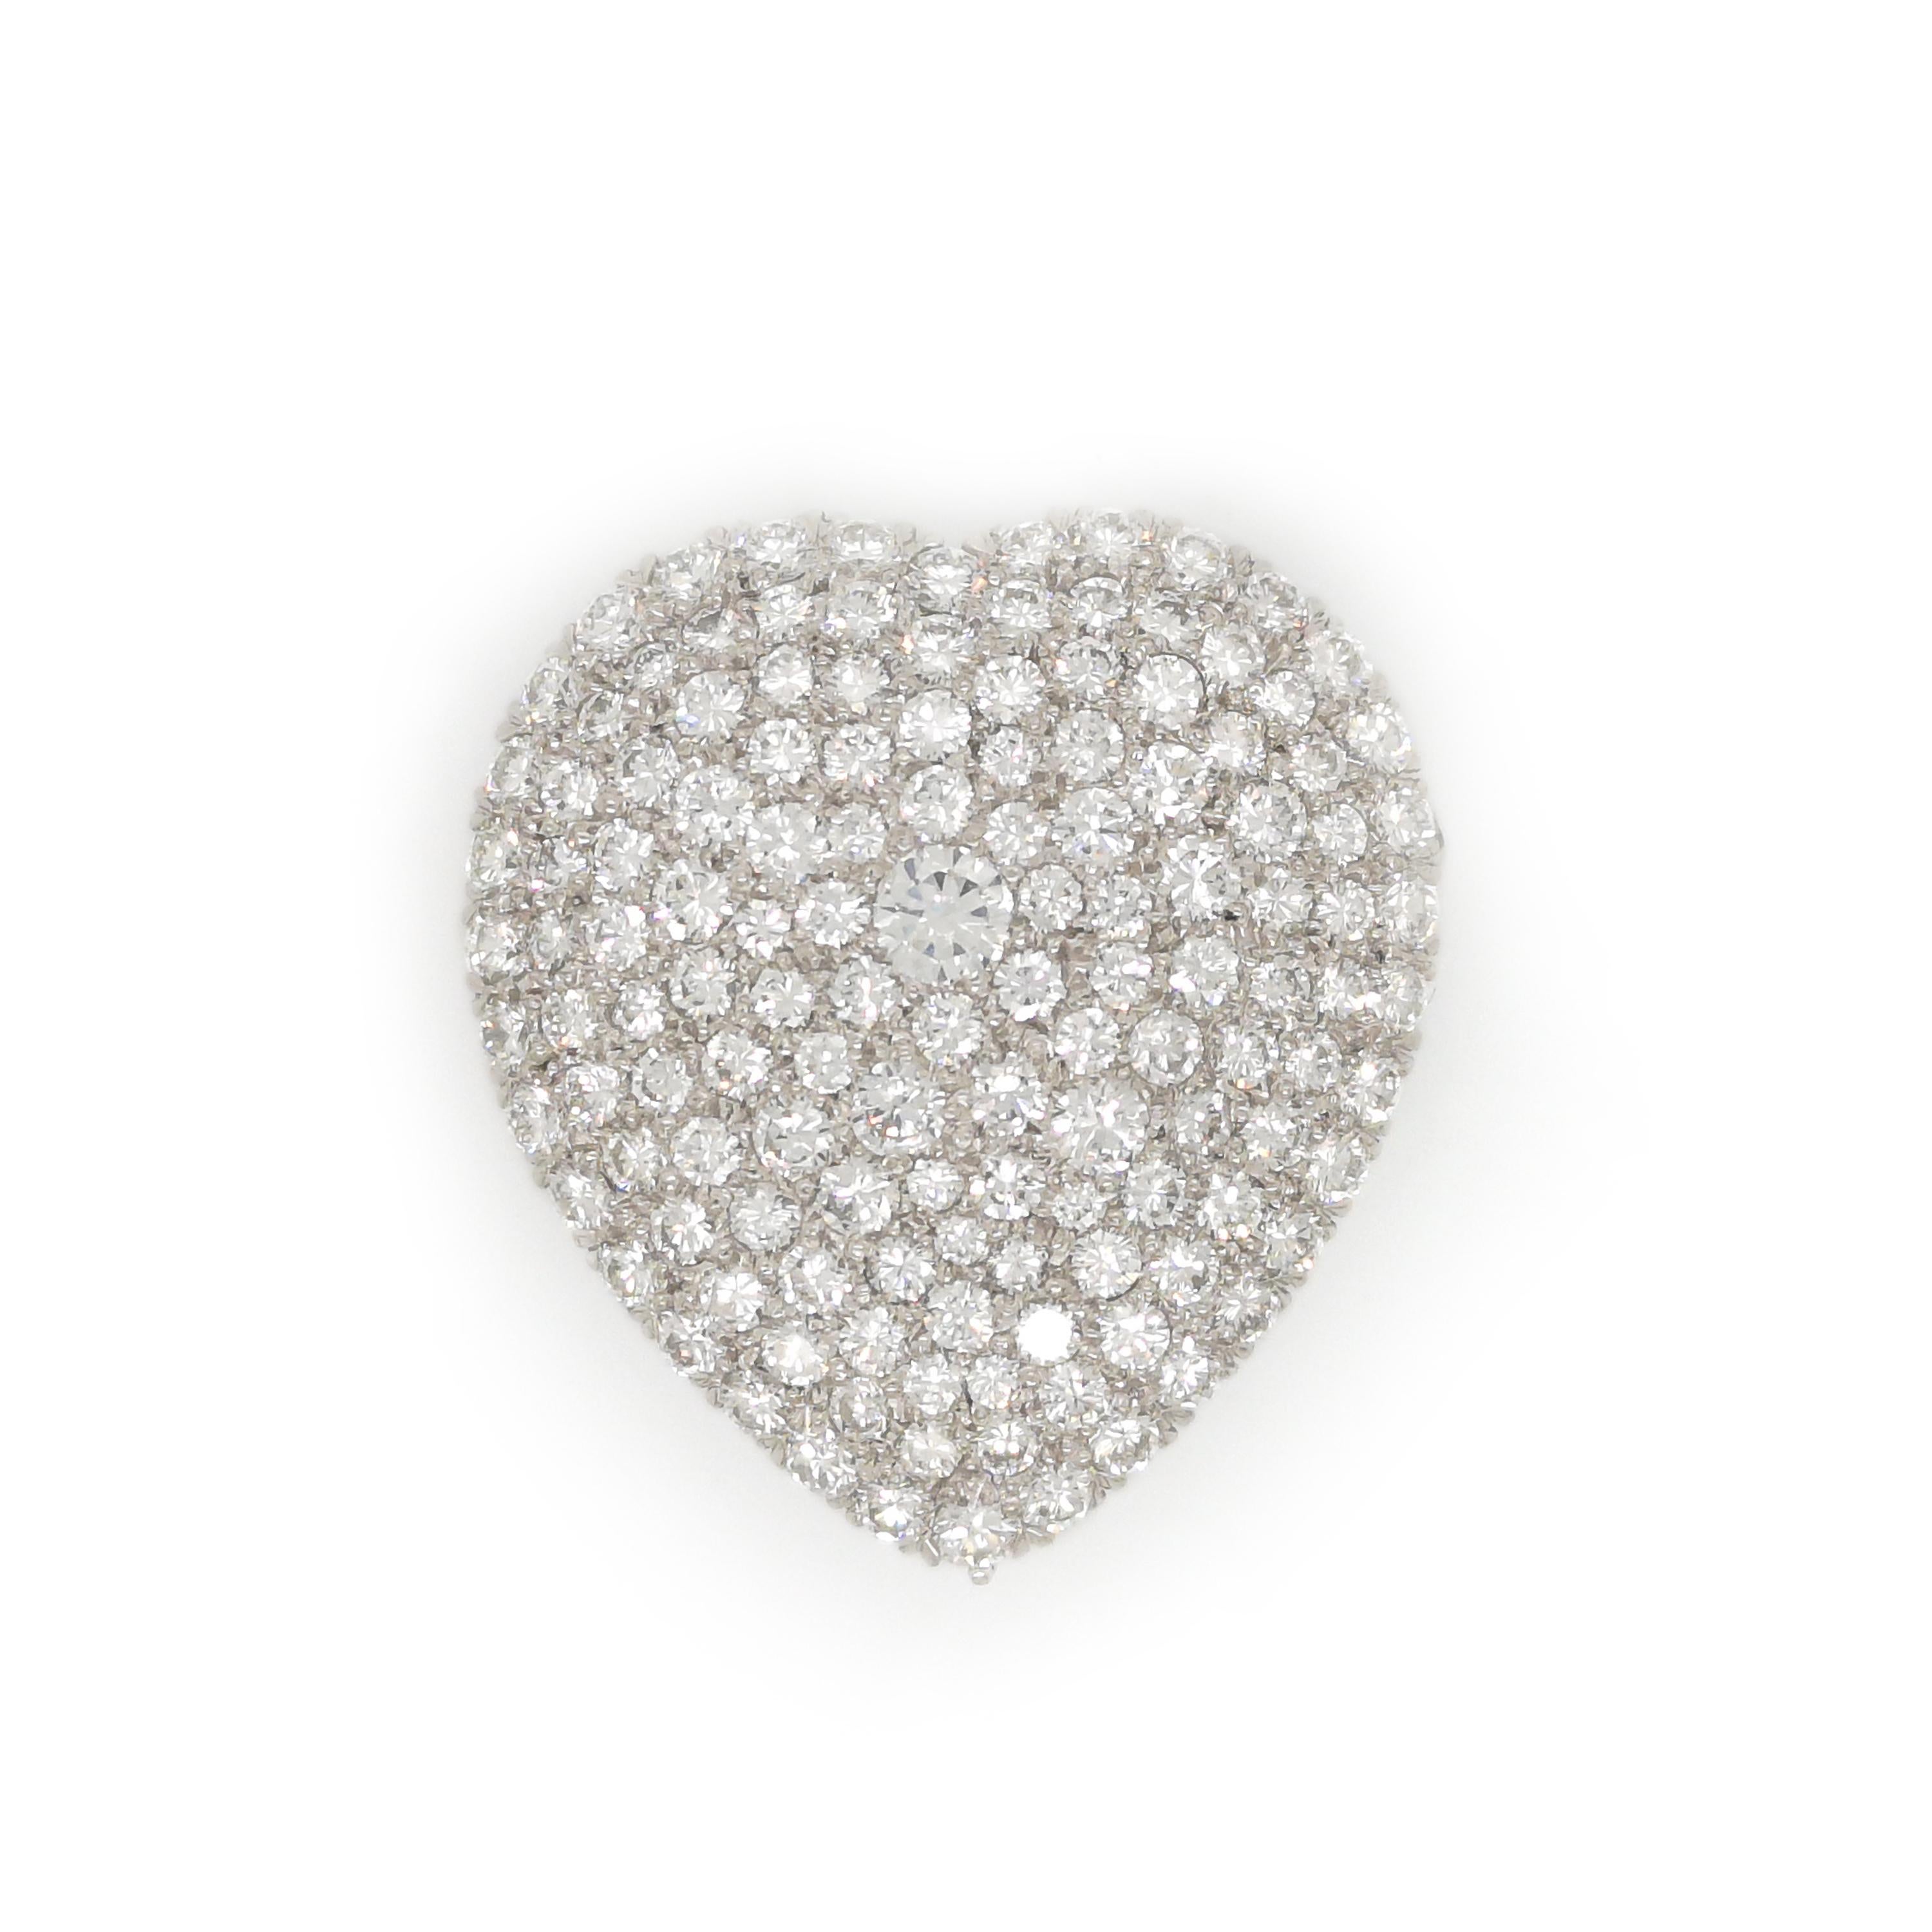 A diamond set heart shape pendant brooch, pavé set with round brilliant-cut diamonds, weighing an estimated total of 5.35ct, mounted in platinum, with shepherd hooks to attach a chain and a brooch pin. In our opinion the diamonds are colour G-H,